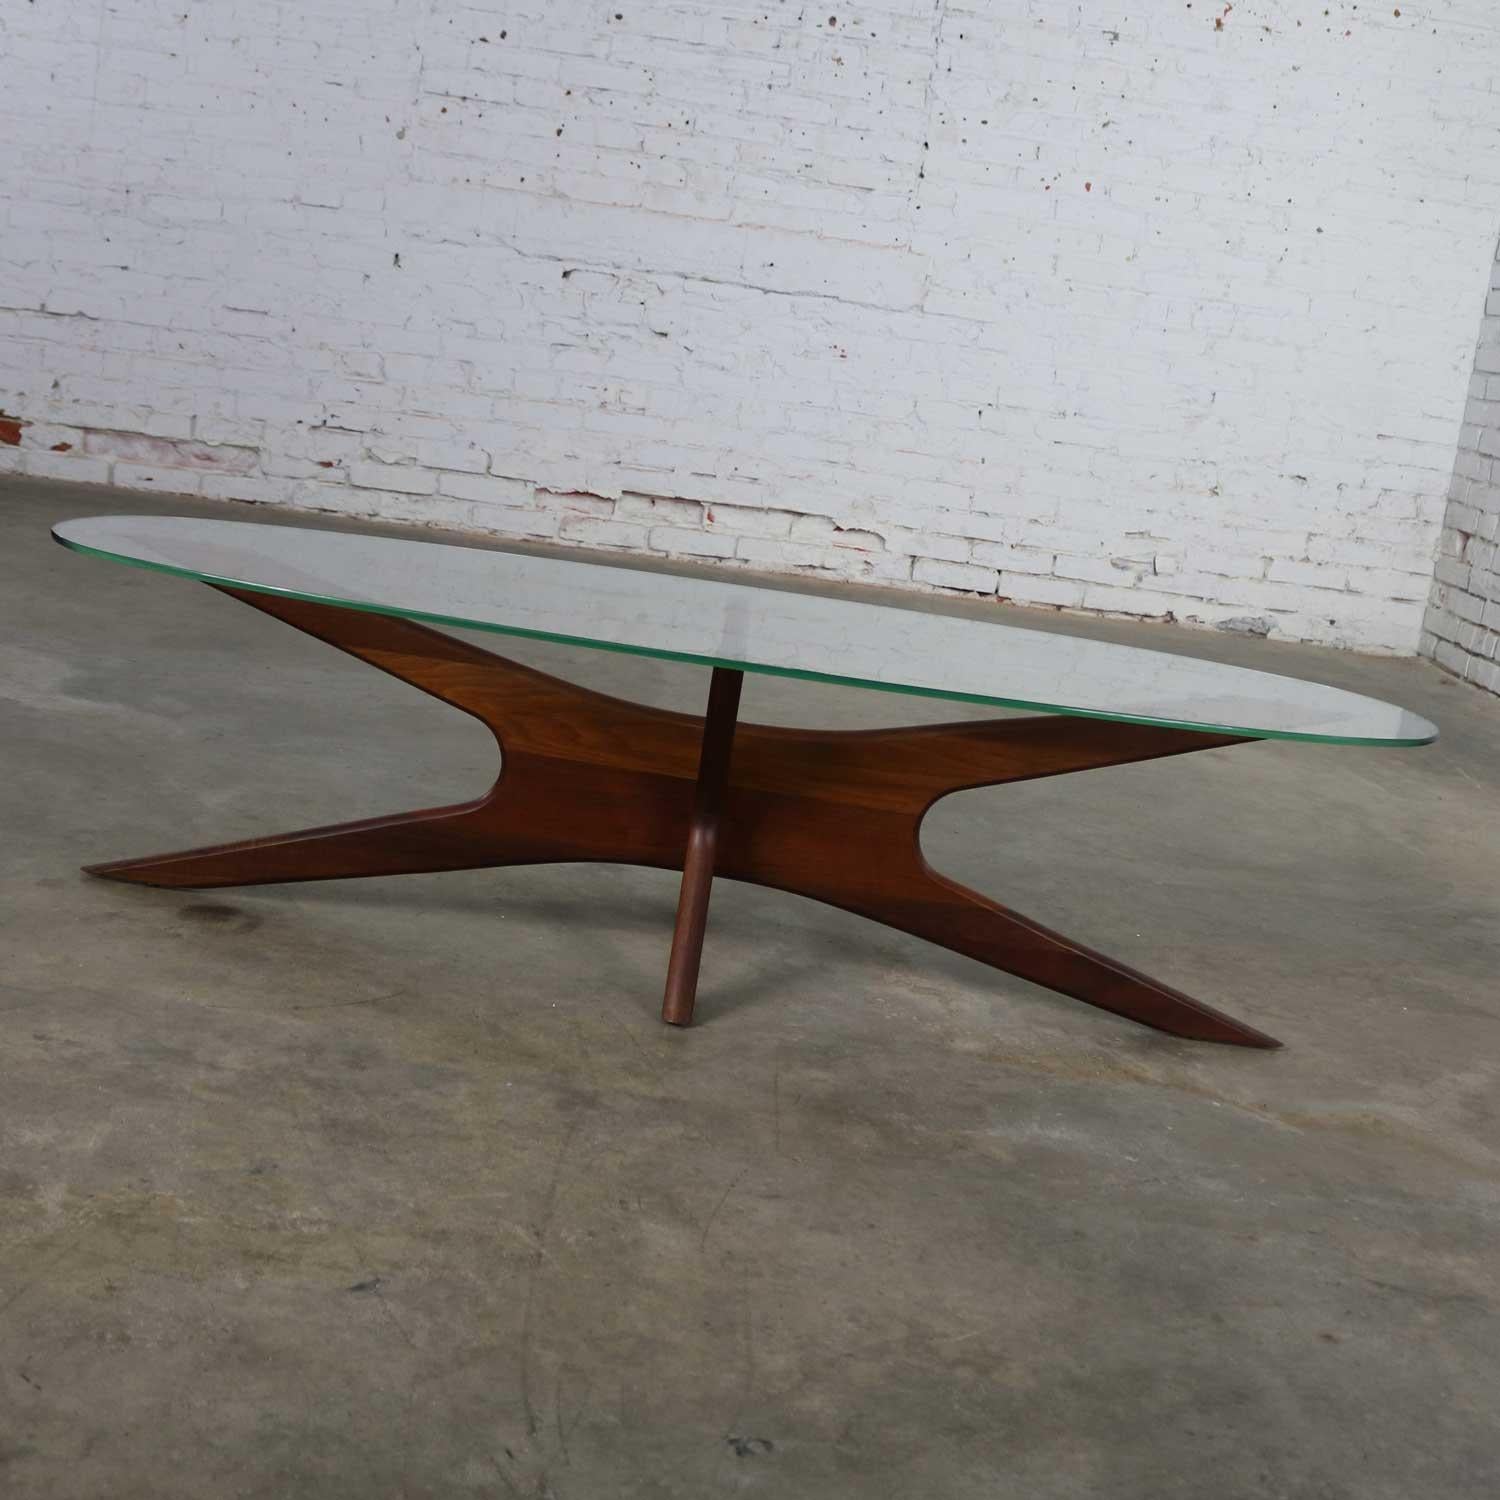 Handsome and iconic walnut and oval glass Mid-Century Modern jacks shaped base coffee table. It is the 893-TGO coffee table design by Adrian Pearsall for his company Craft Associates. This table is in wonderful vintage condition overall with the